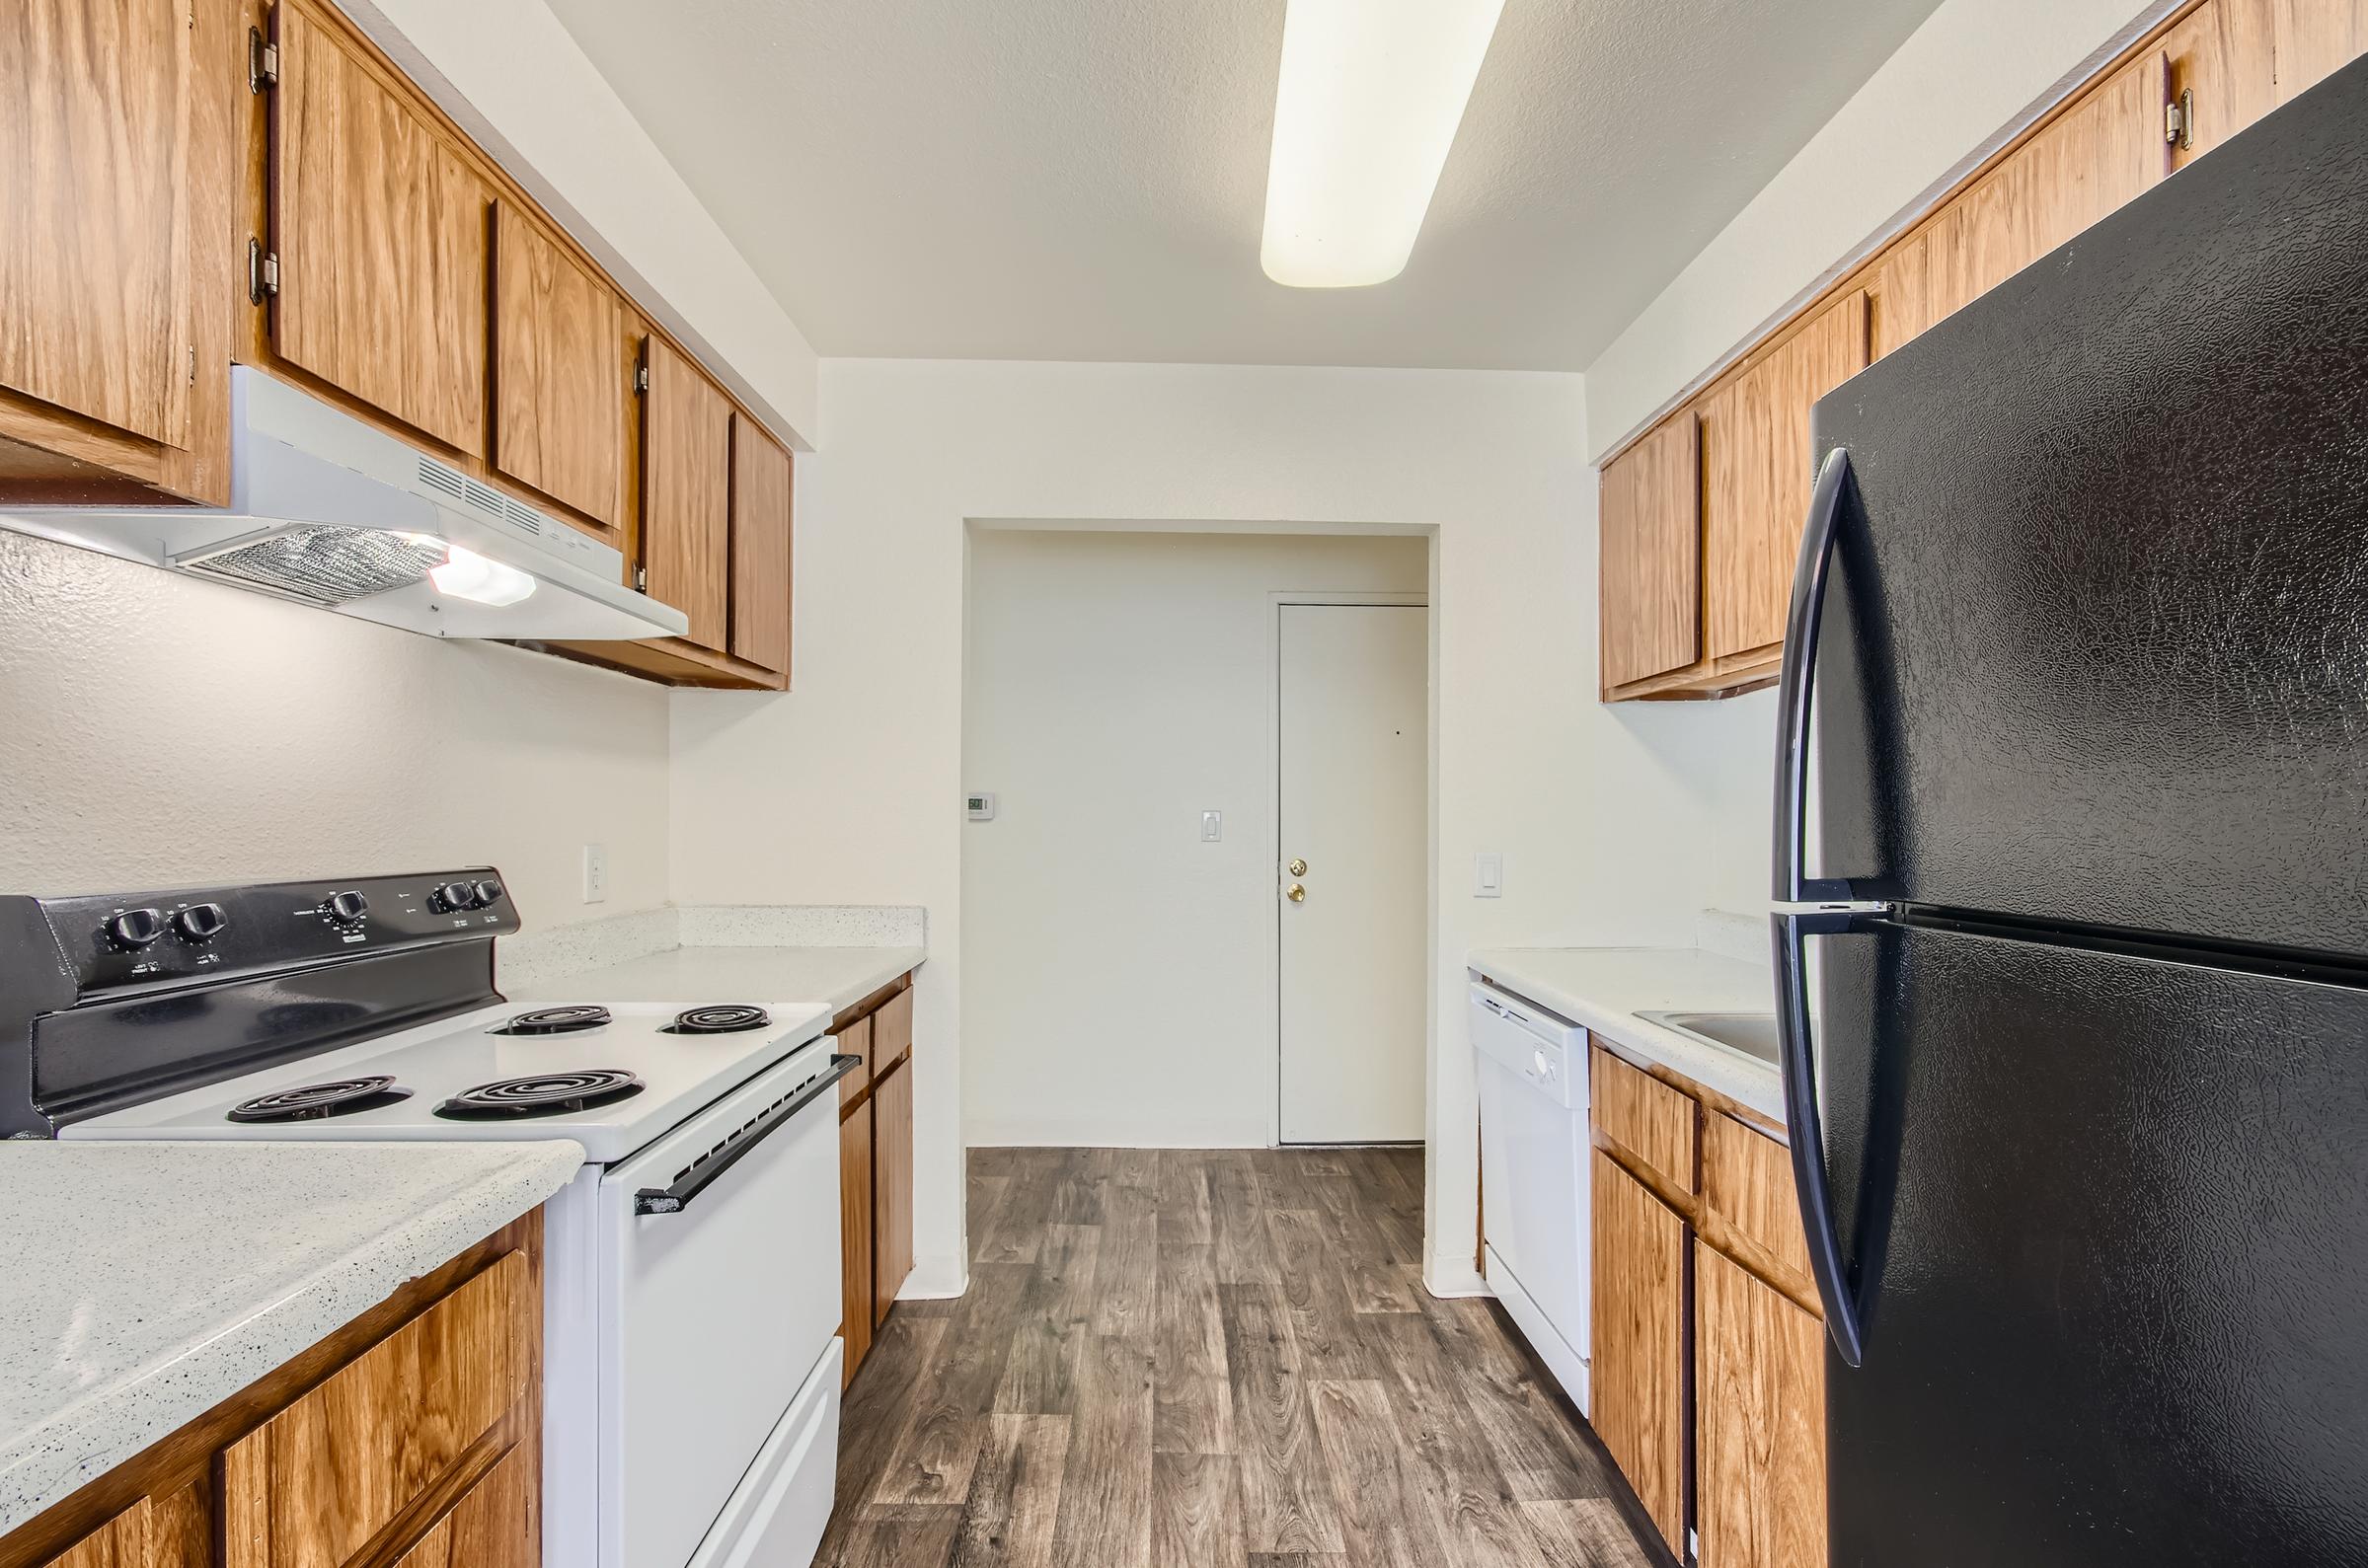 Retro Mesa apartment kitchen with wooden cabinets, black refrigerator and white appliances